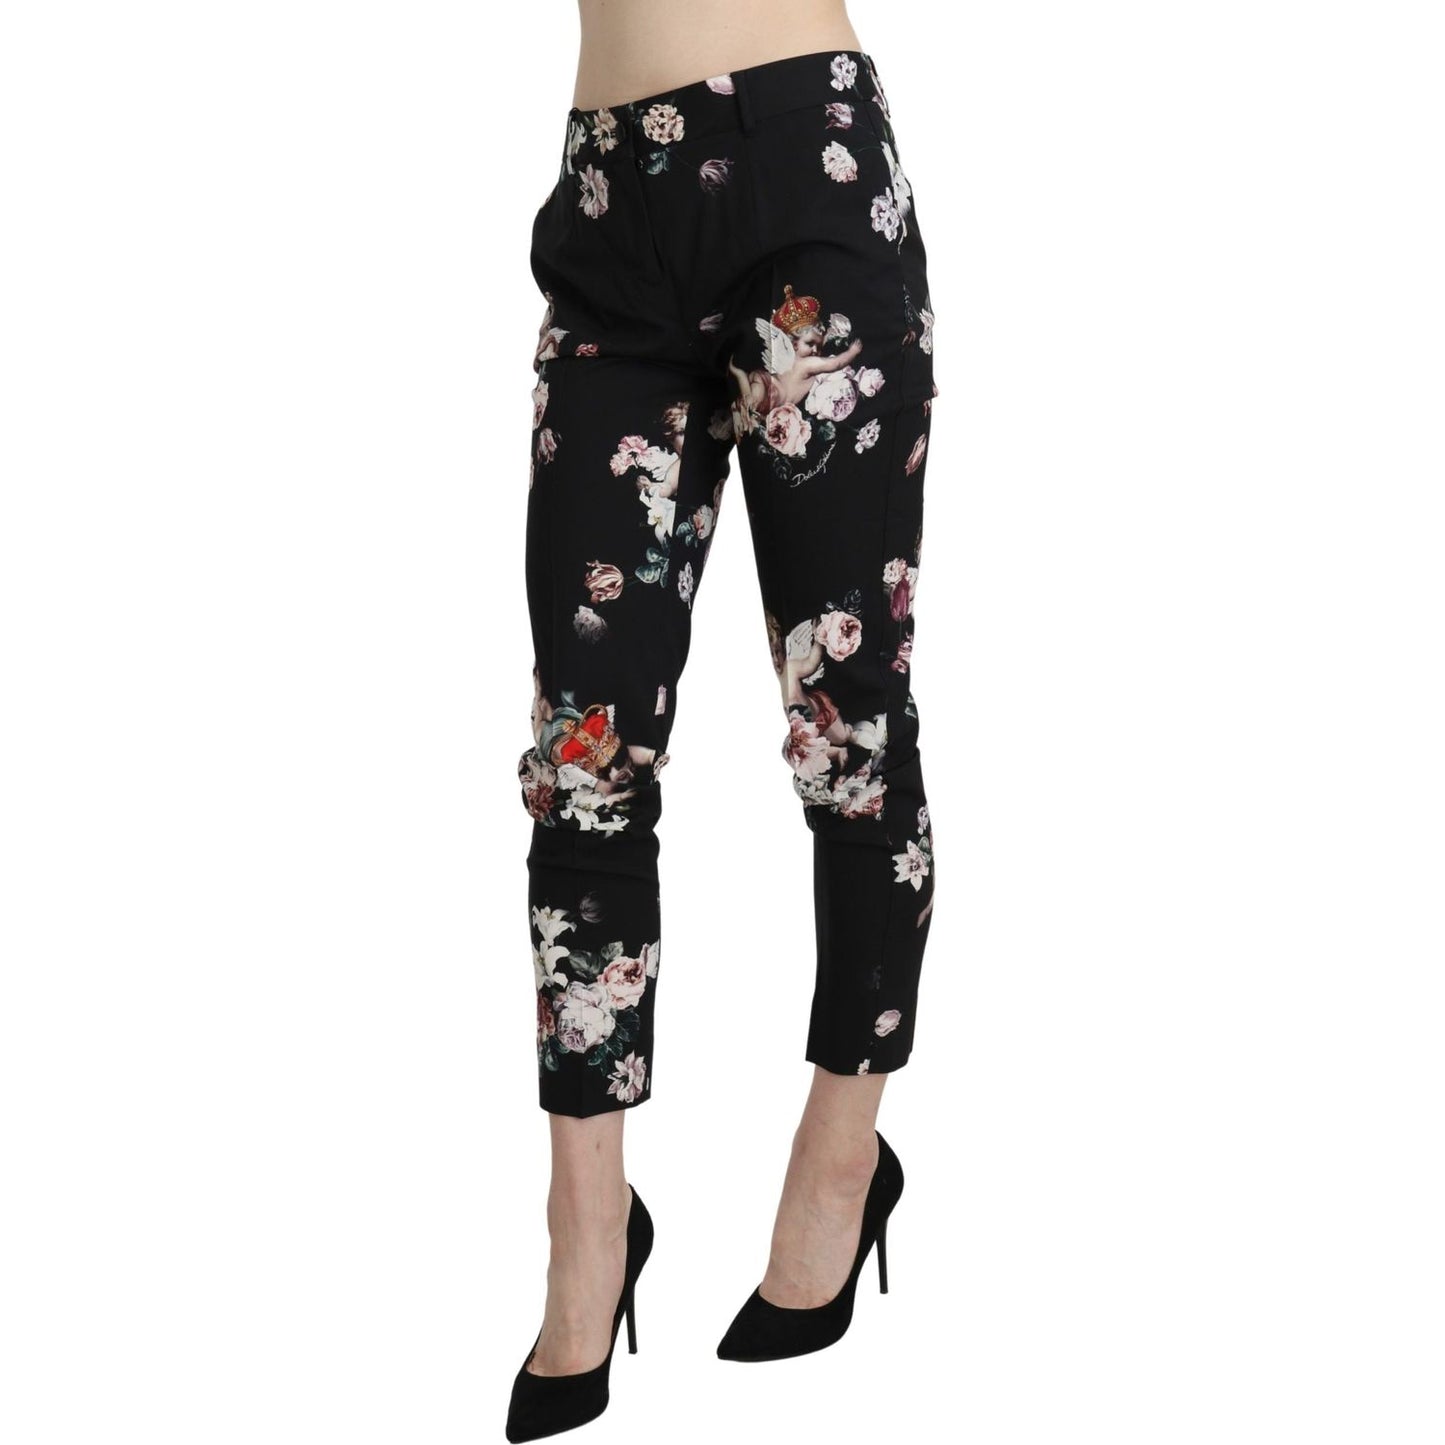 Dolce & Gabbana Elegant High Waist Cropped Trousers black-angel-floral-cropped-trouser-wool-pants Jeans & Pants IMG_0965-scaled-4094a594-b90.jpg